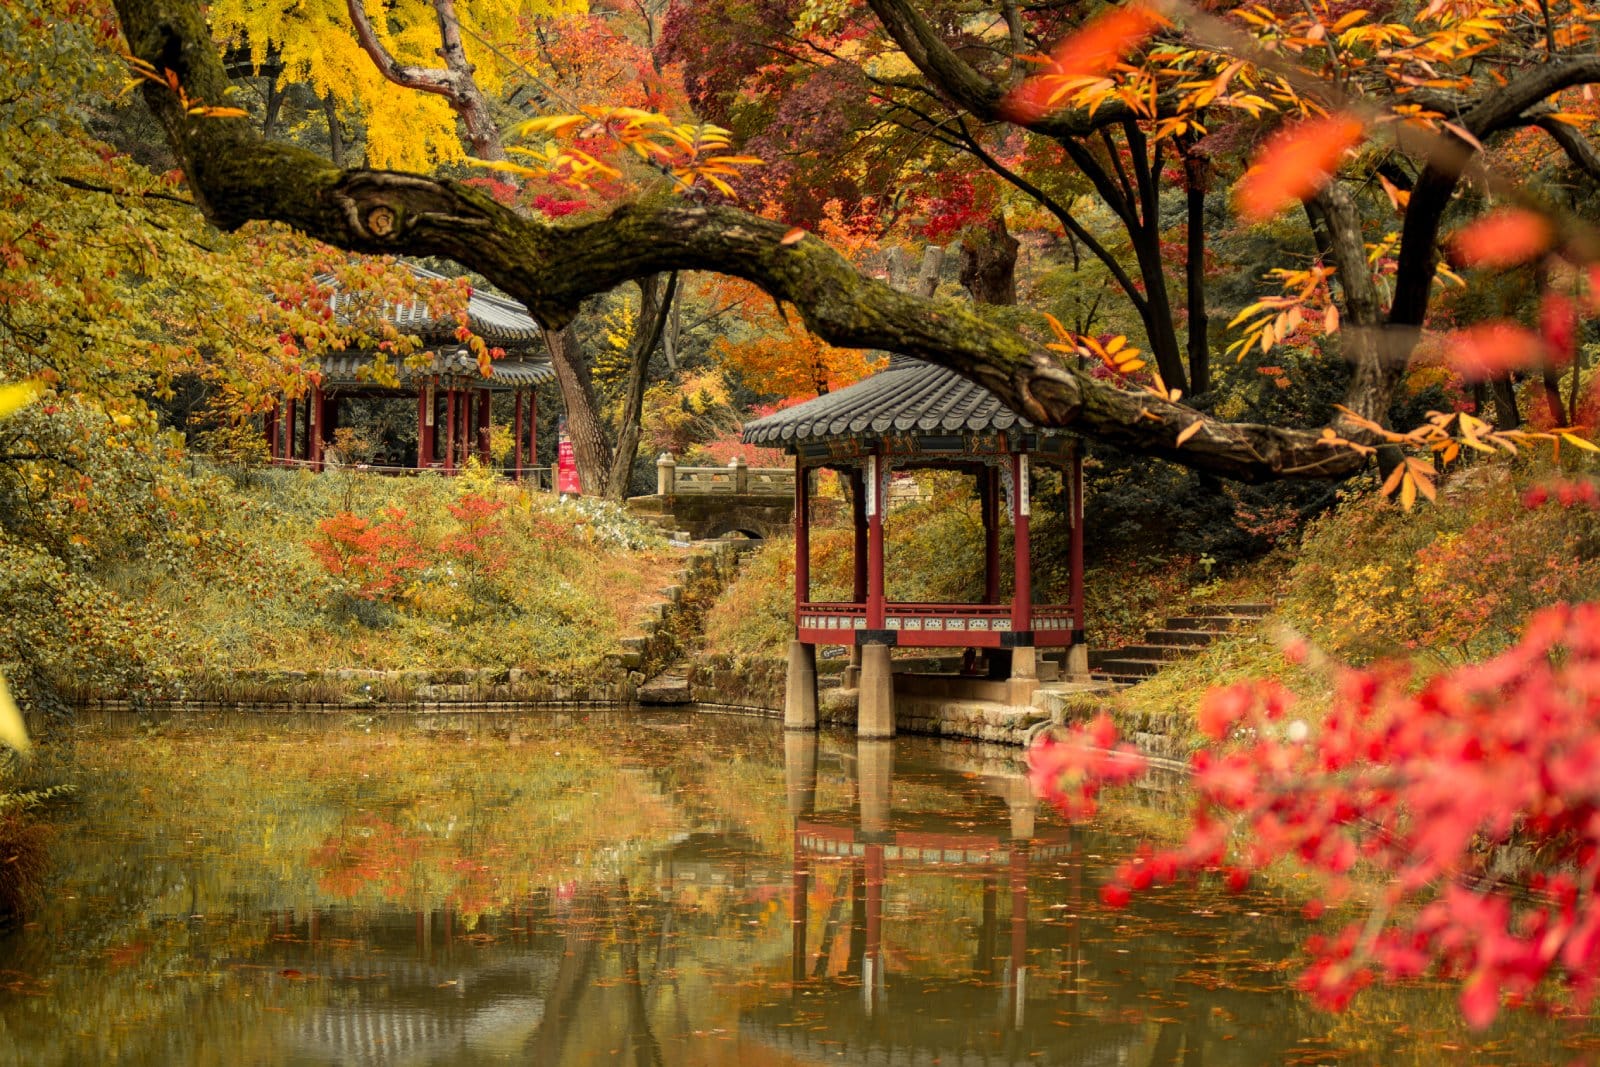 <p class="wp-caption-text">Image Credit: Shutterstock / HAEWON JANG</p>  <p><span>Changdeokgung Palace, a UNESCO World Heritage site, is renowned for its harmonious blend of traditional Korean architecture and natural environment. The palace’s rear garden, Huwon (Secret Garden), is a masterpiece of Korean garden design, featuring a beautiful array of pavilions, ponds, and landscaped lawns set against the backdrop of the city’s modern skyline. This palace complex offers a serene retreat from the urban hustle and bustle, allowing visitors to step back in time and enjoy the tranquility of its historical surroundings.</span></p>